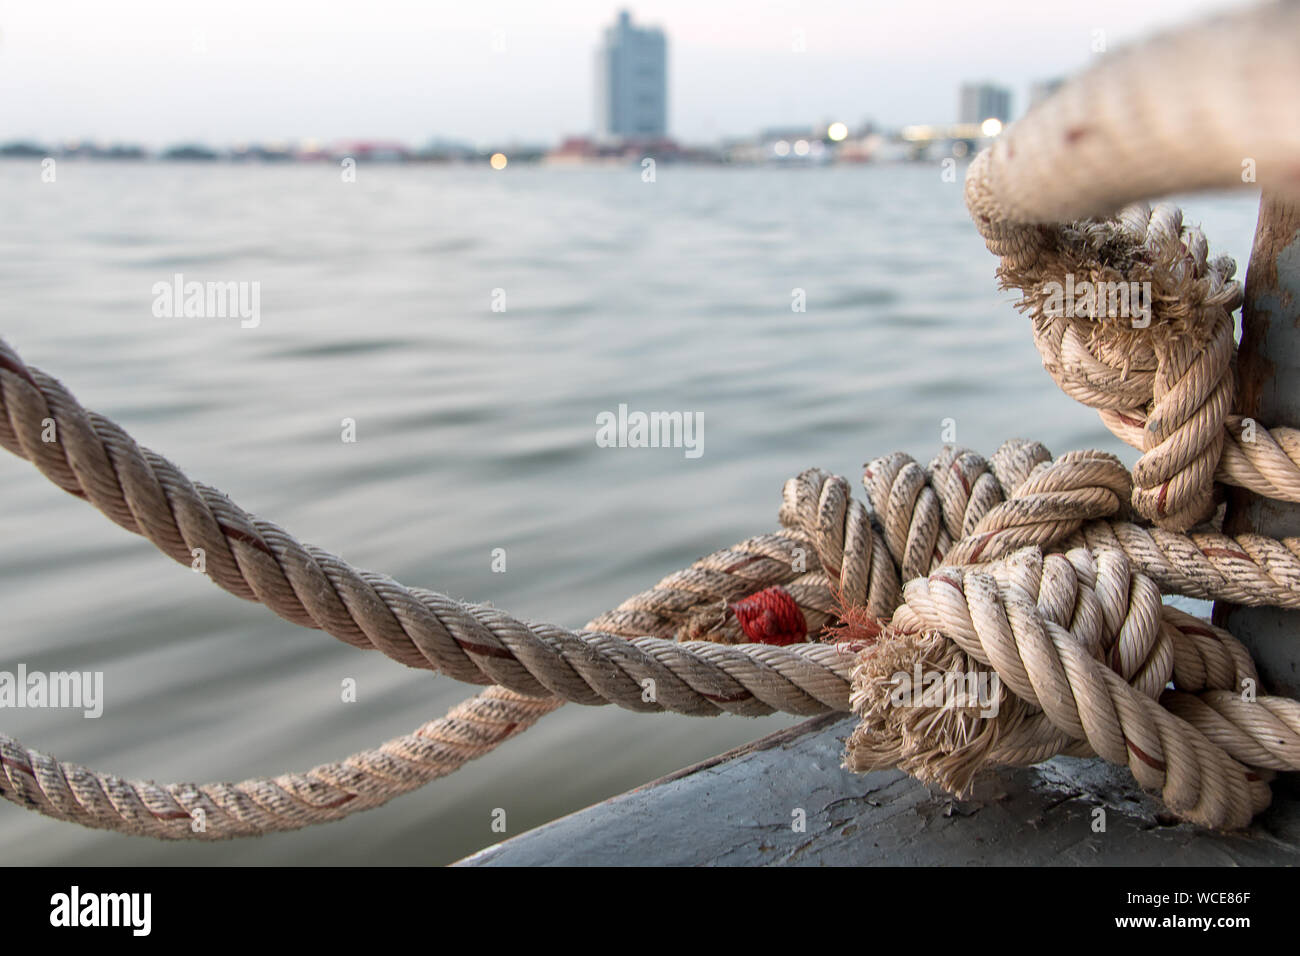 Boat rope tied to a wooden post on a floating boat railing, close